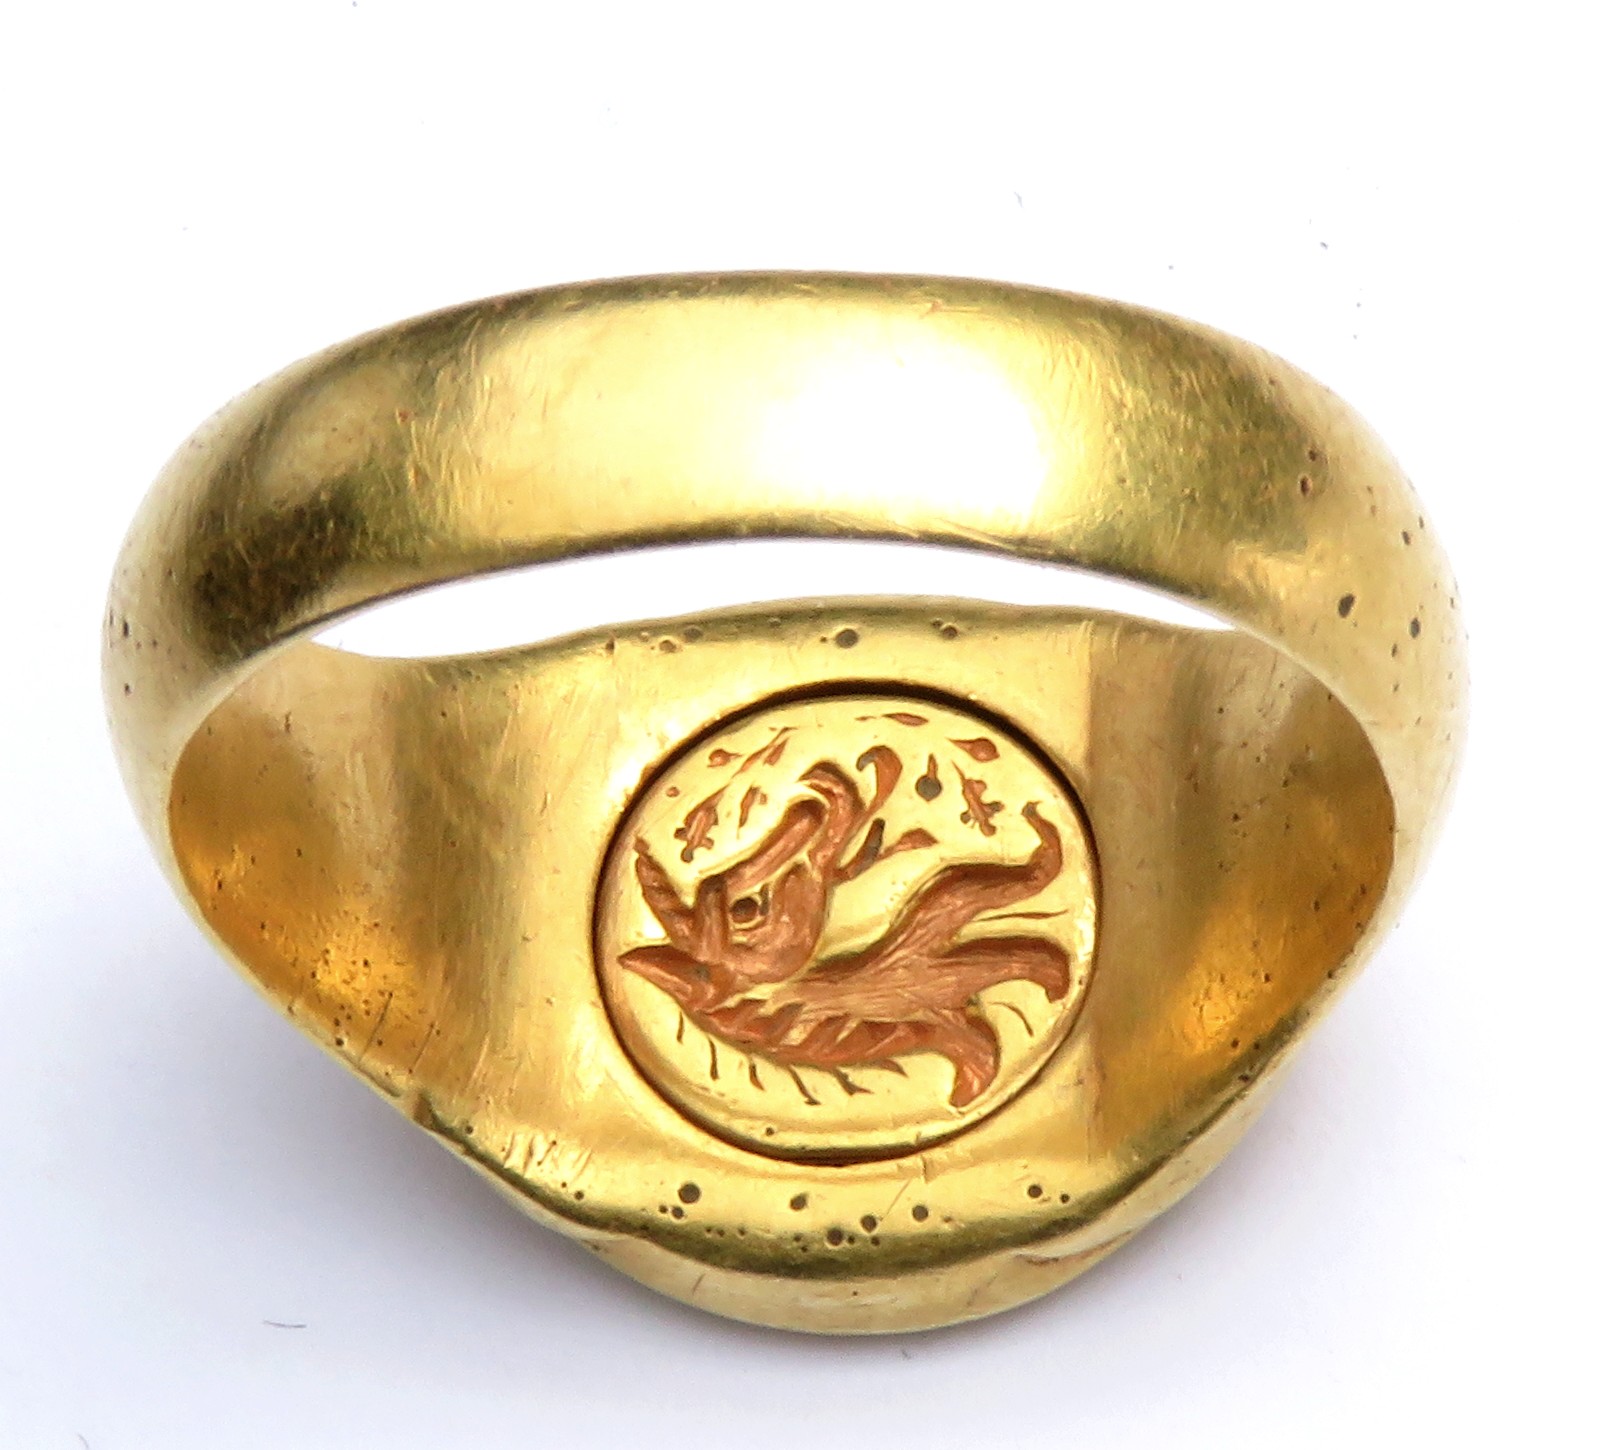 Reverse of the ring